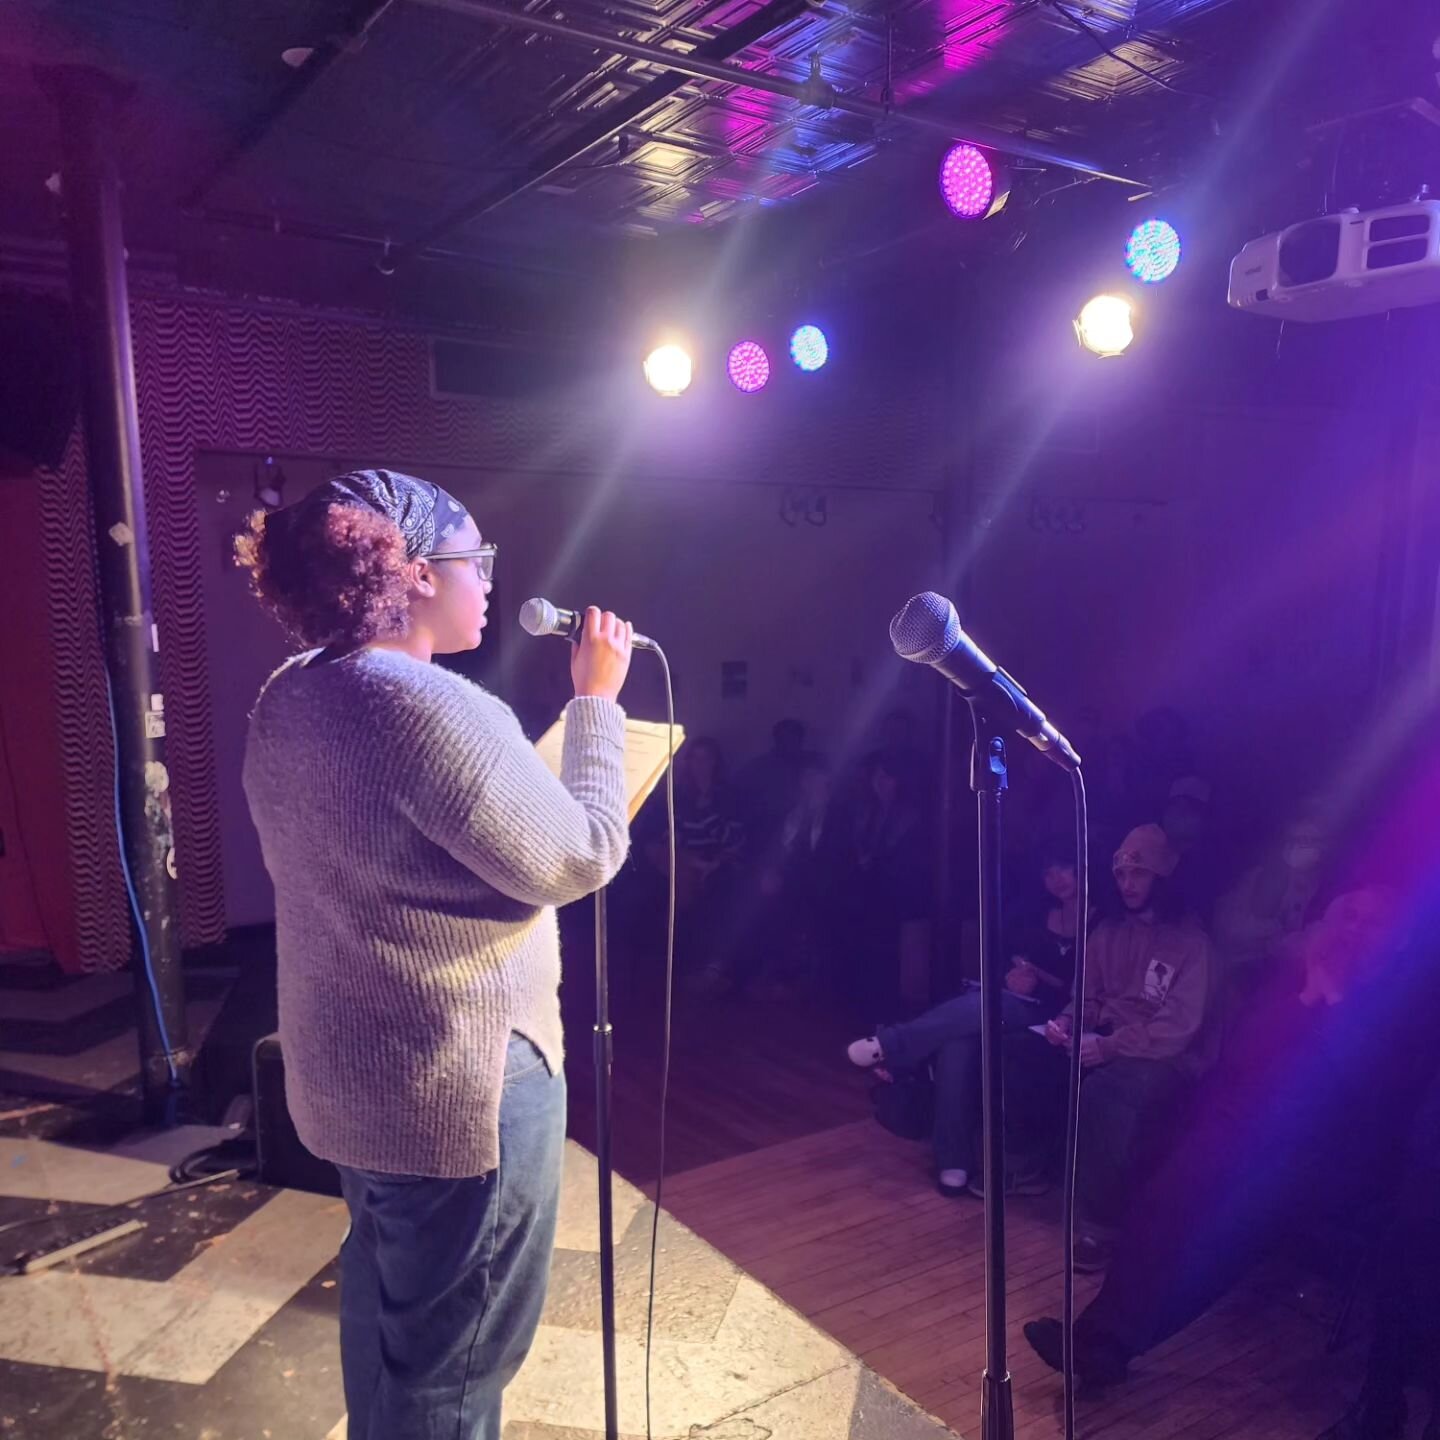 Thank you to everyone who came out for last night's open mic and poetry slam! You all packed both lists and we heard some great poems, stories and music. Congrats to Sherai and Angel, who advance to finals in May! Thank you to the volunteer judges an